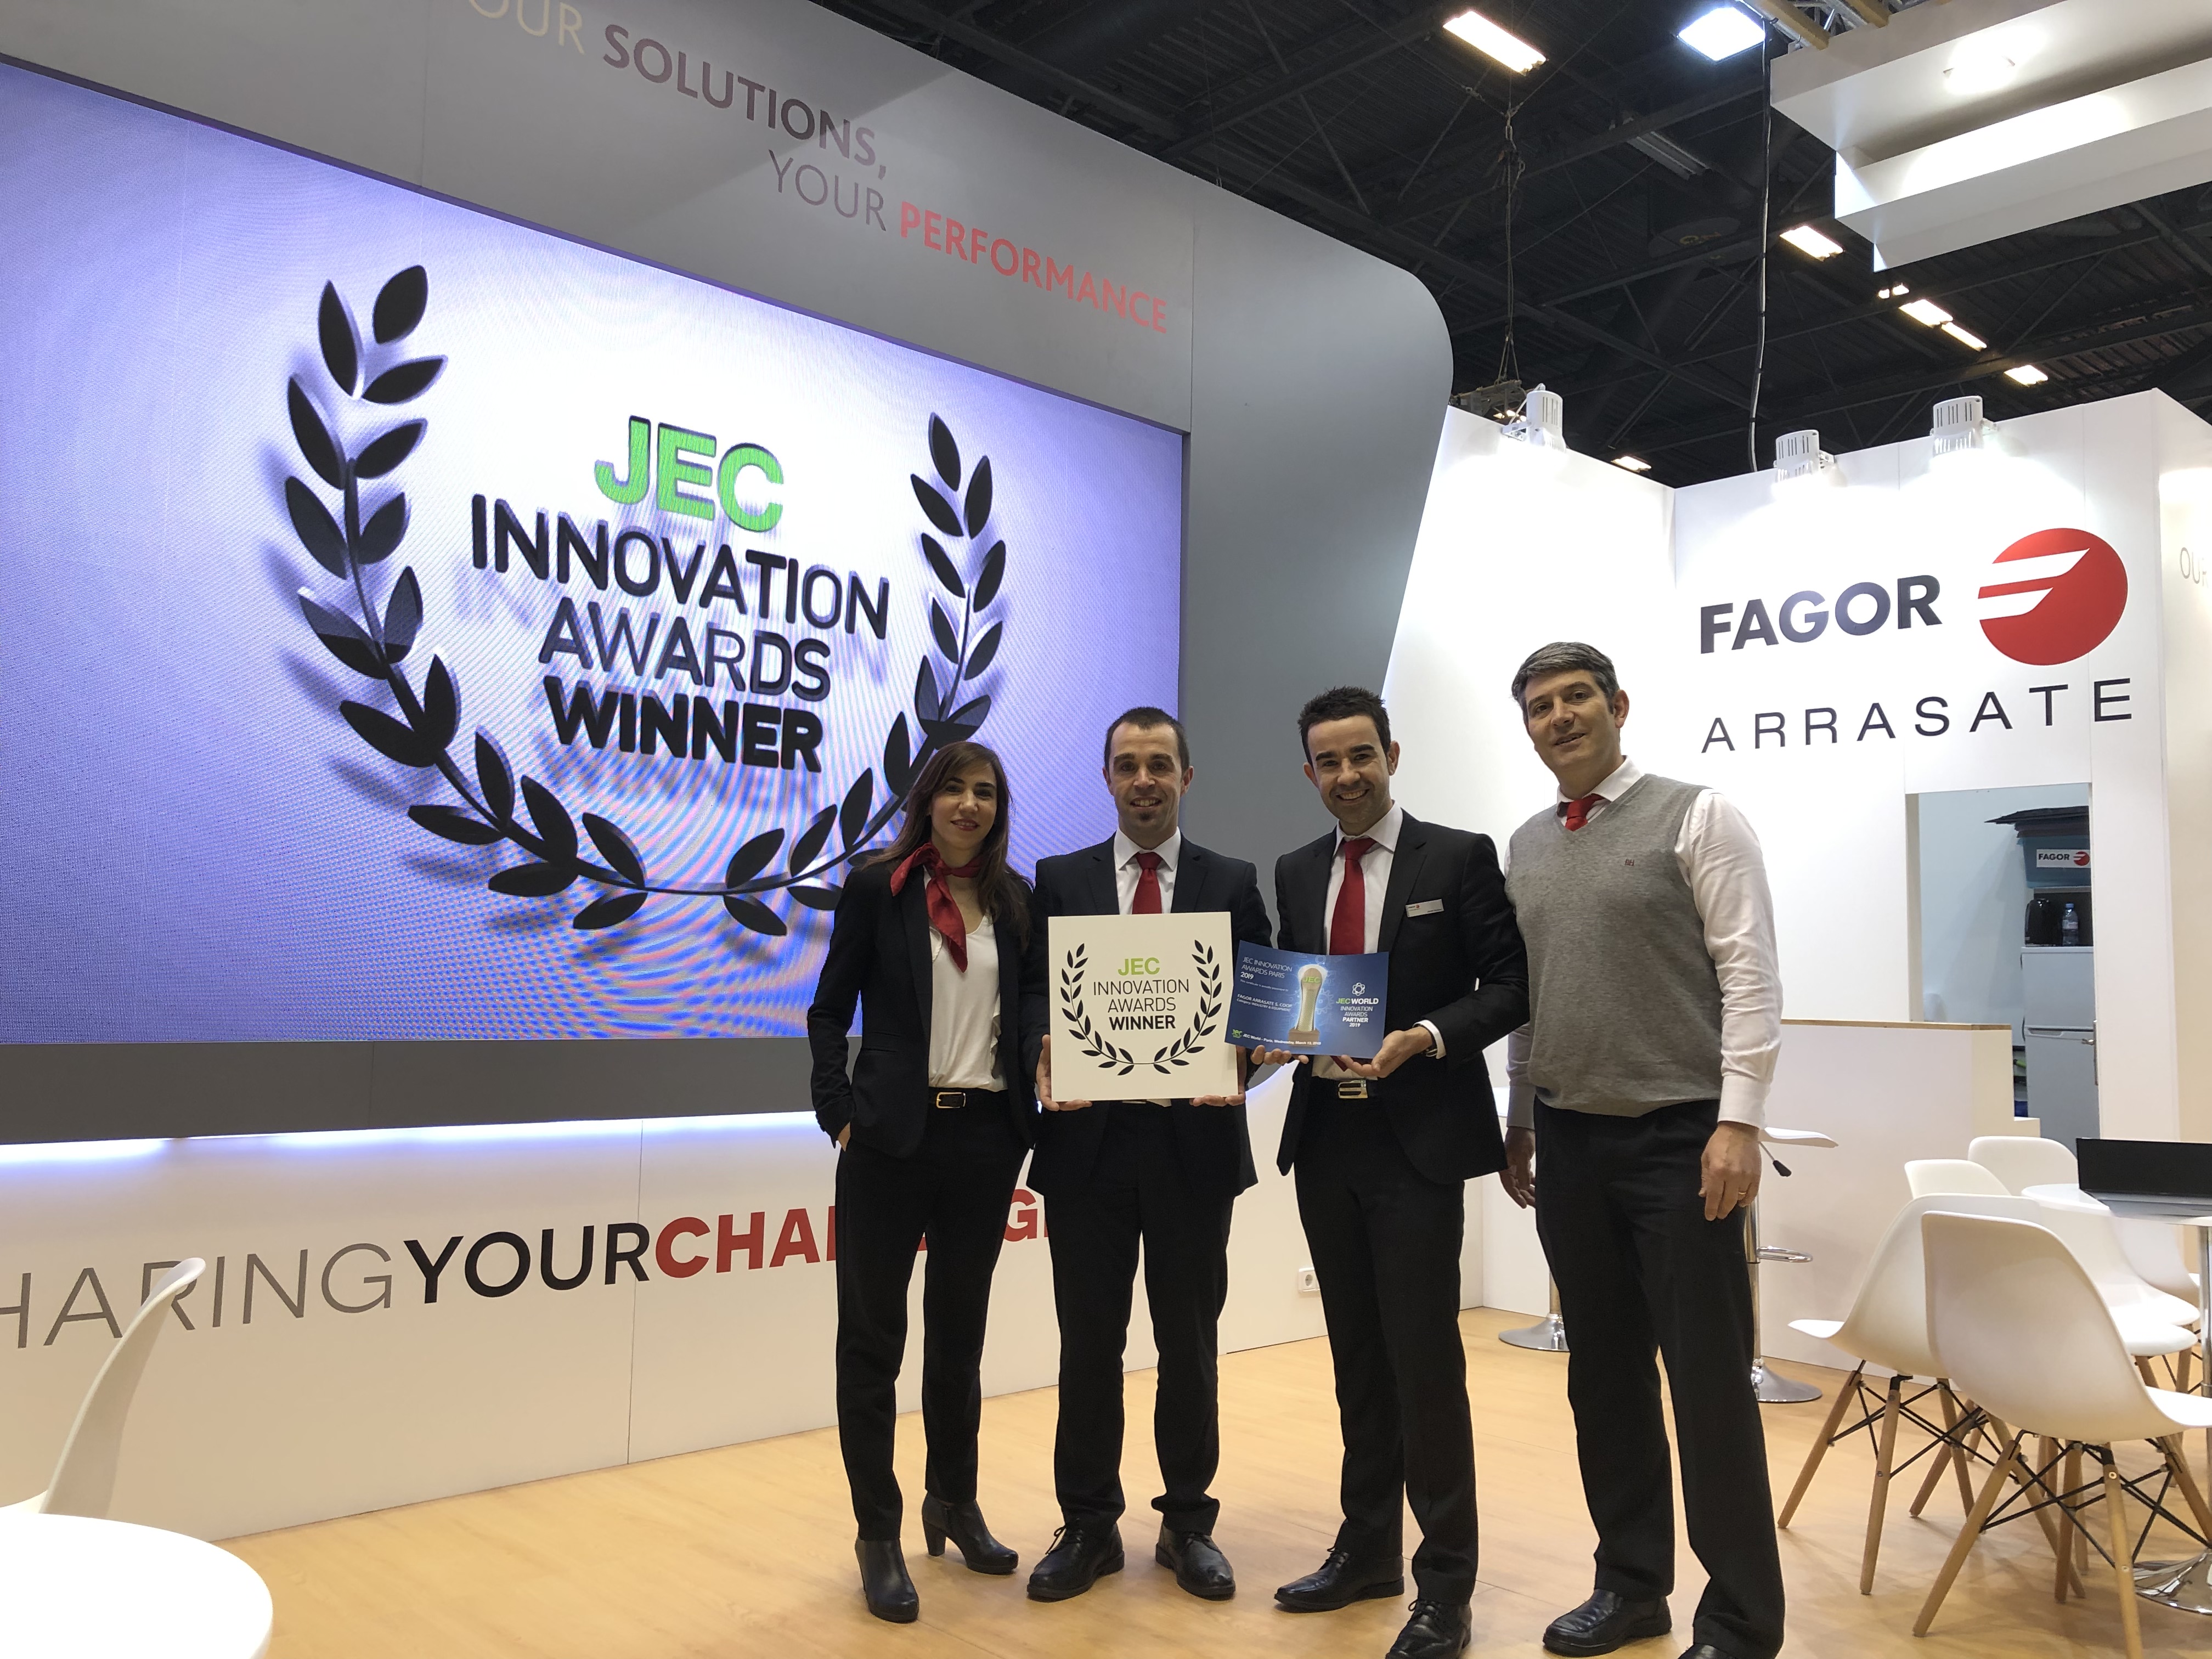 FAGOR ARRASATE’s collaborative project of an ultra-fast consolidator machine system receives the JEC Innovation Award